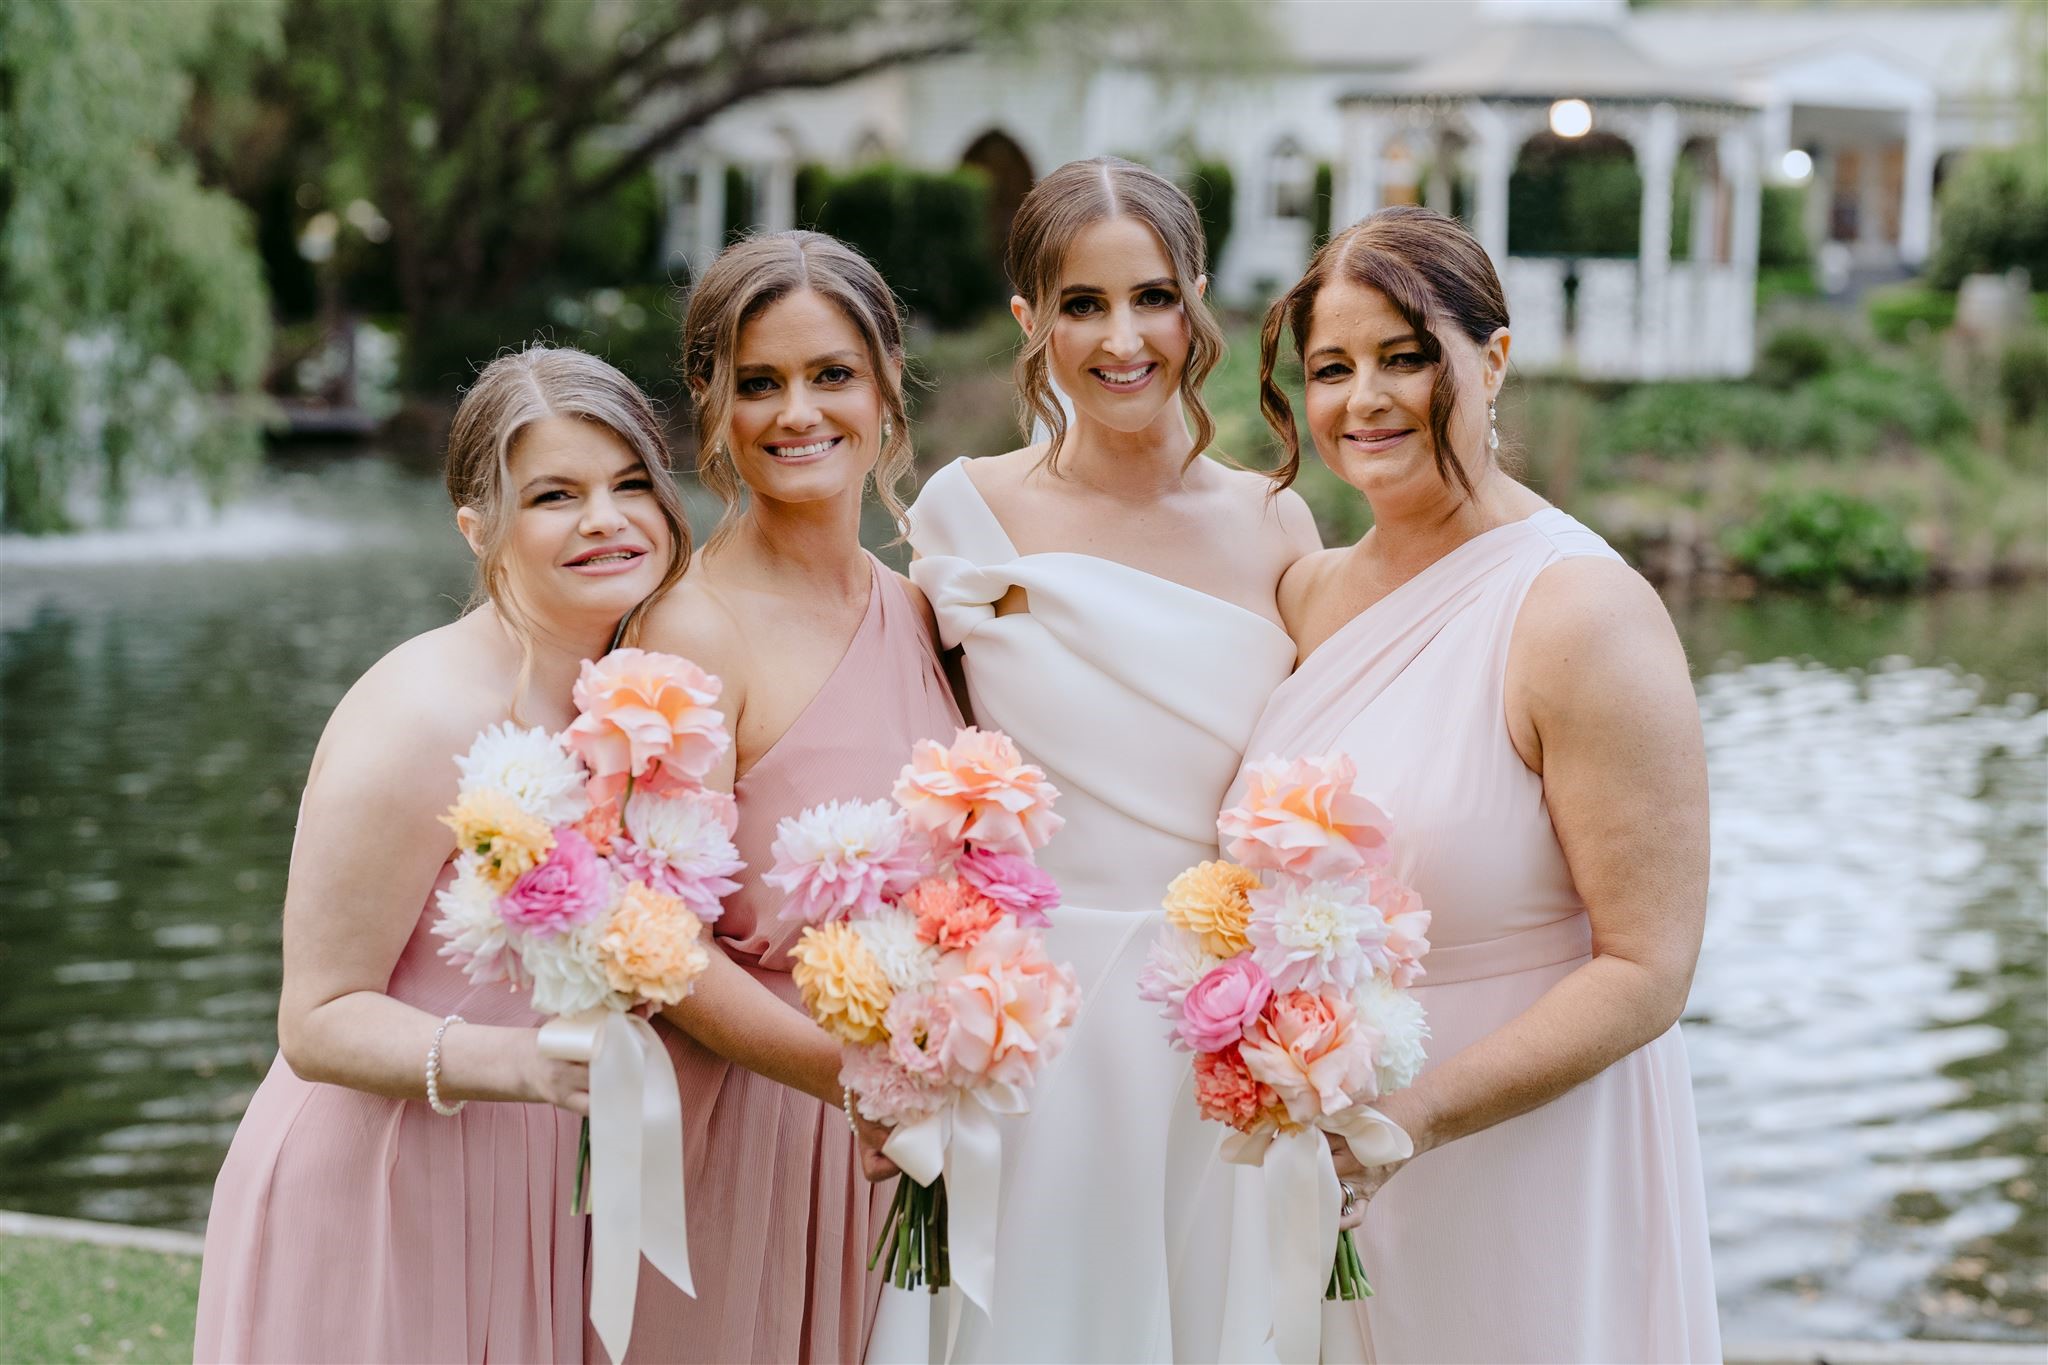 Bride with her three bridesmaids in pink dresses with pastel orange and pink bouquets.